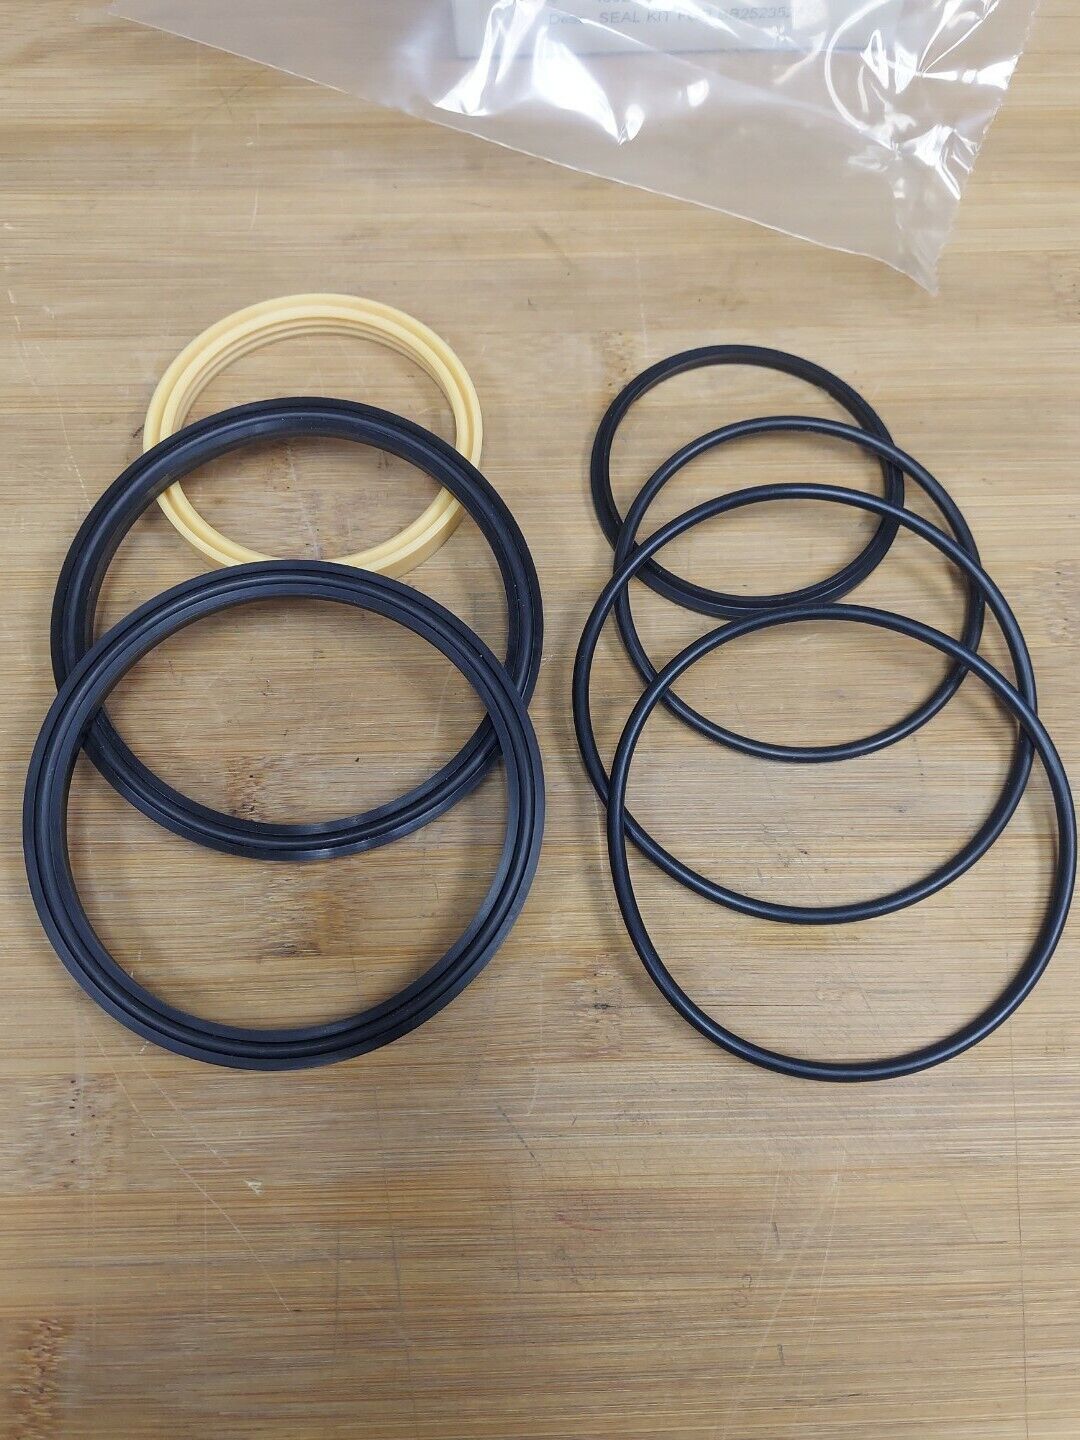 Parker 4092333 New Cylinder Seal Kit for BB252352A0 / BB252352A50 (BK106)